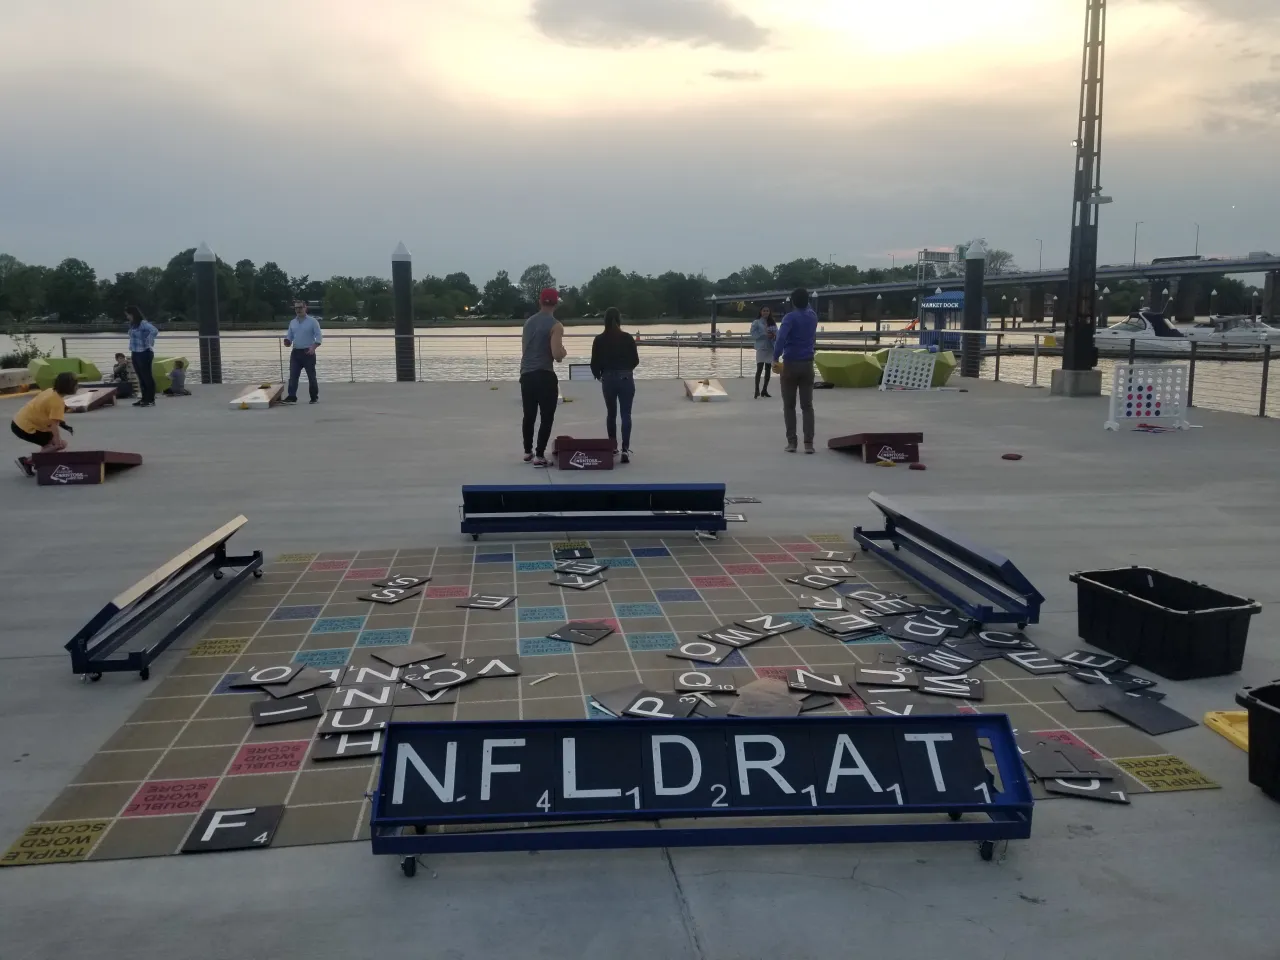 life size scrabble game